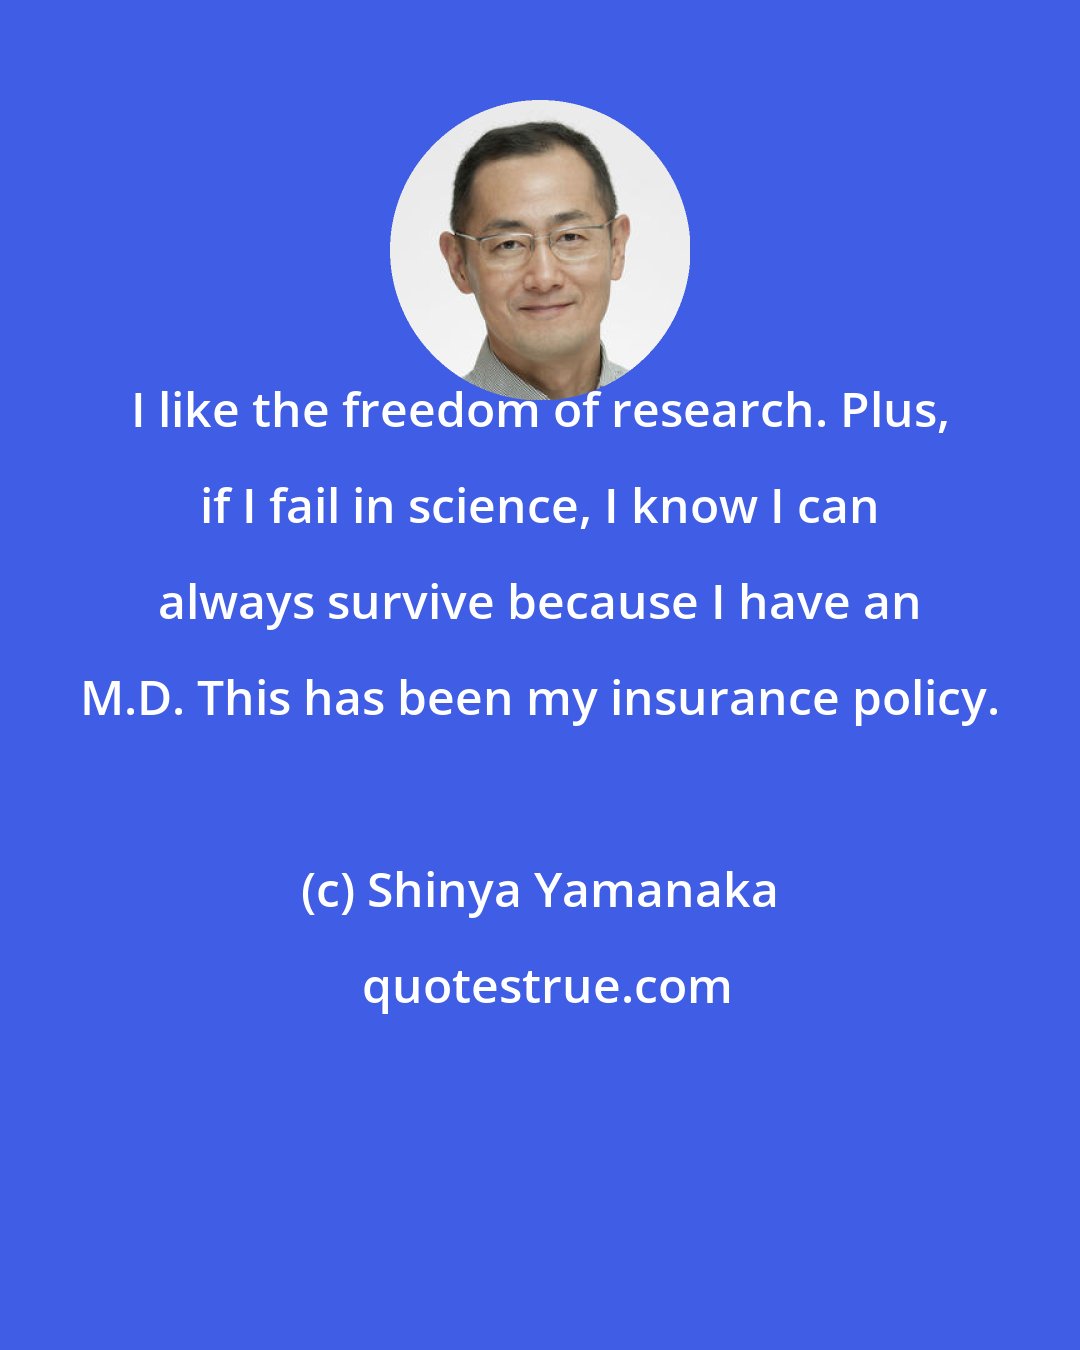 Shinya Yamanaka: I like the freedom of research. Plus, if I fail in science, I know I can always survive because I have an M.D. This has been my insurance policy.